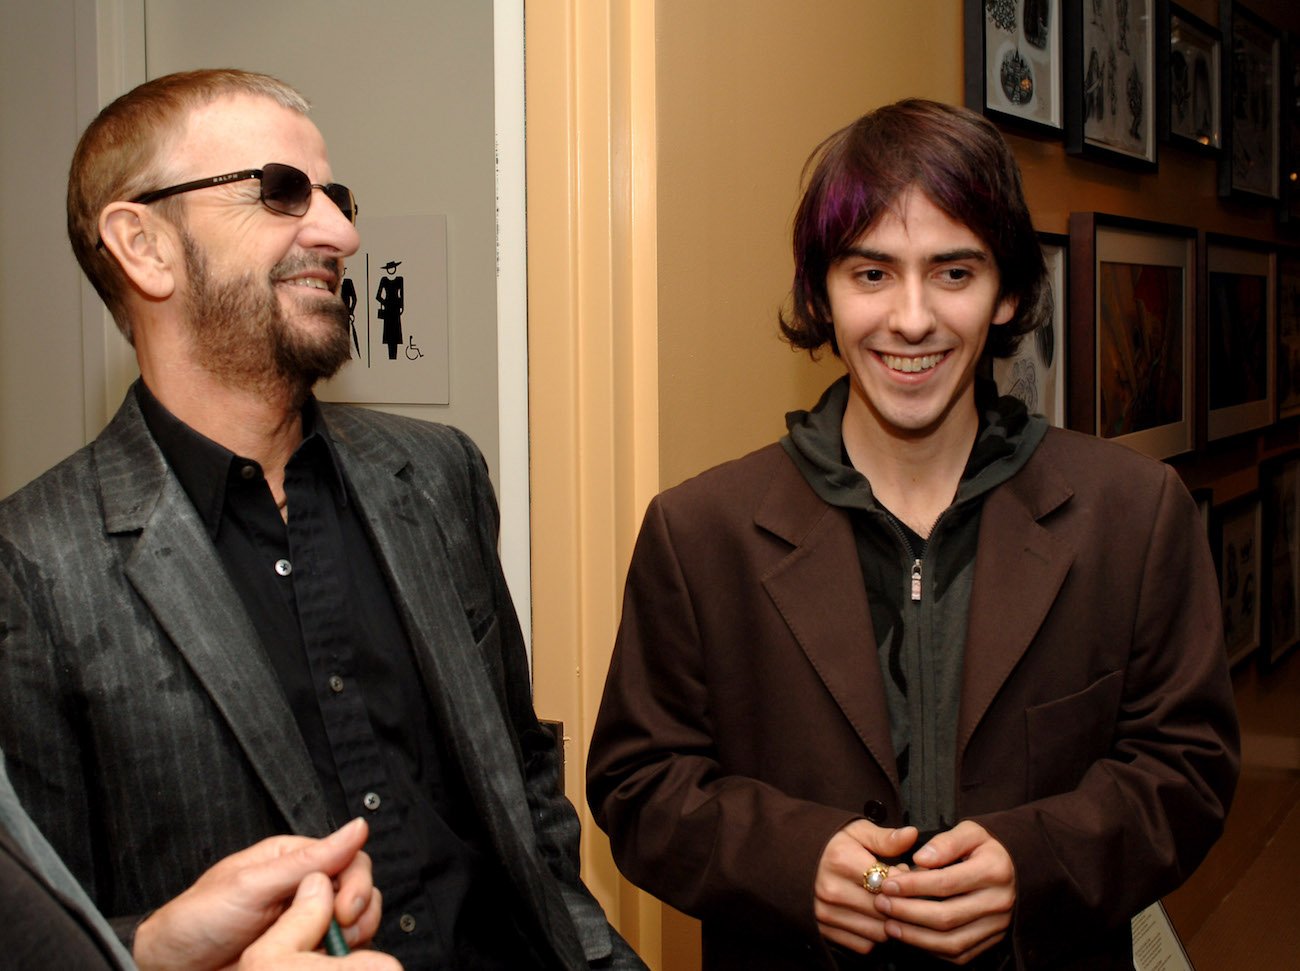 Ringo Starr and George Harrison's son, Dhani, at an event in 2005.